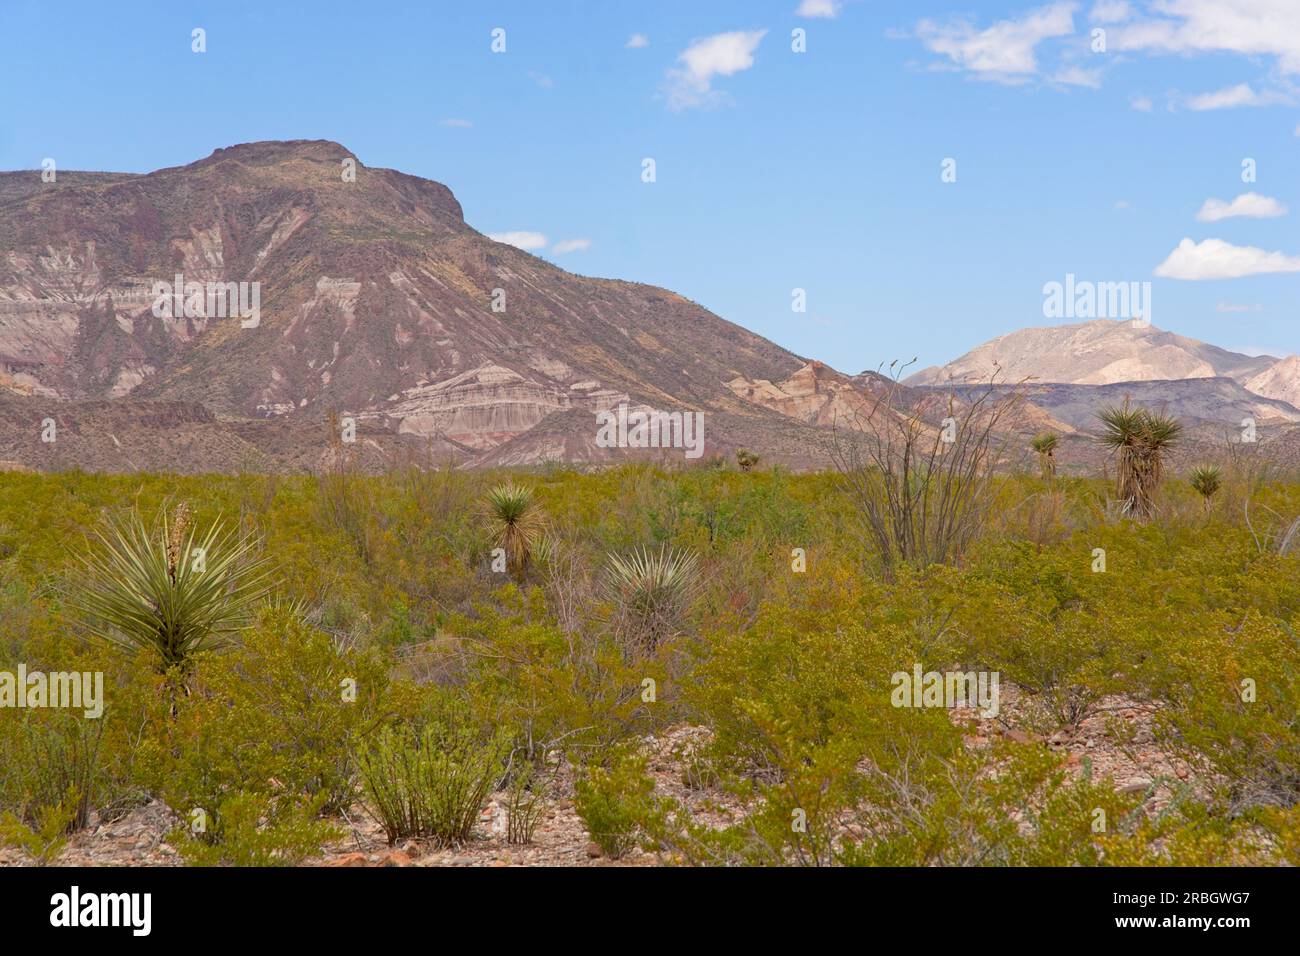 Ocotillo cactus and yucca dot the creosote bush plain before mountain ridge in Chihuahuan desert of Big Bend Ranch State Park Stock Photo